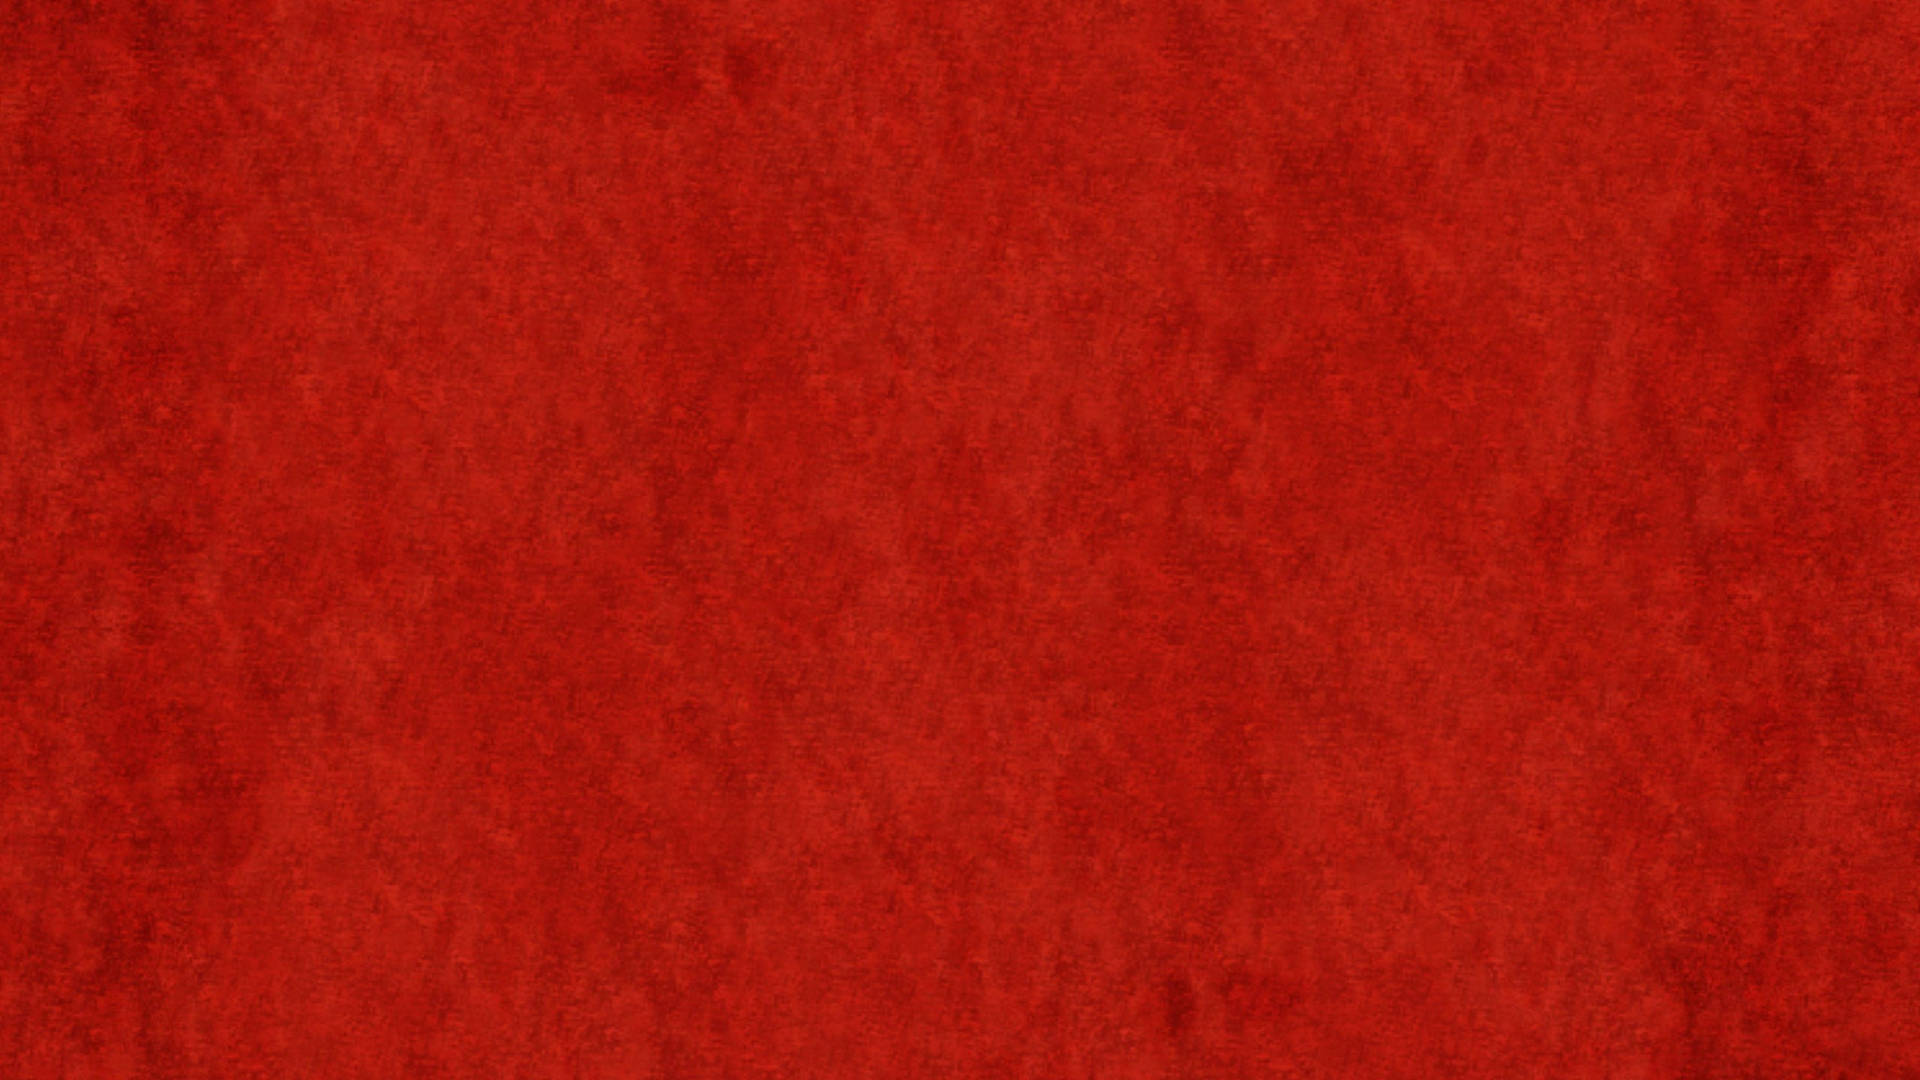 Pure Red Carpet Background